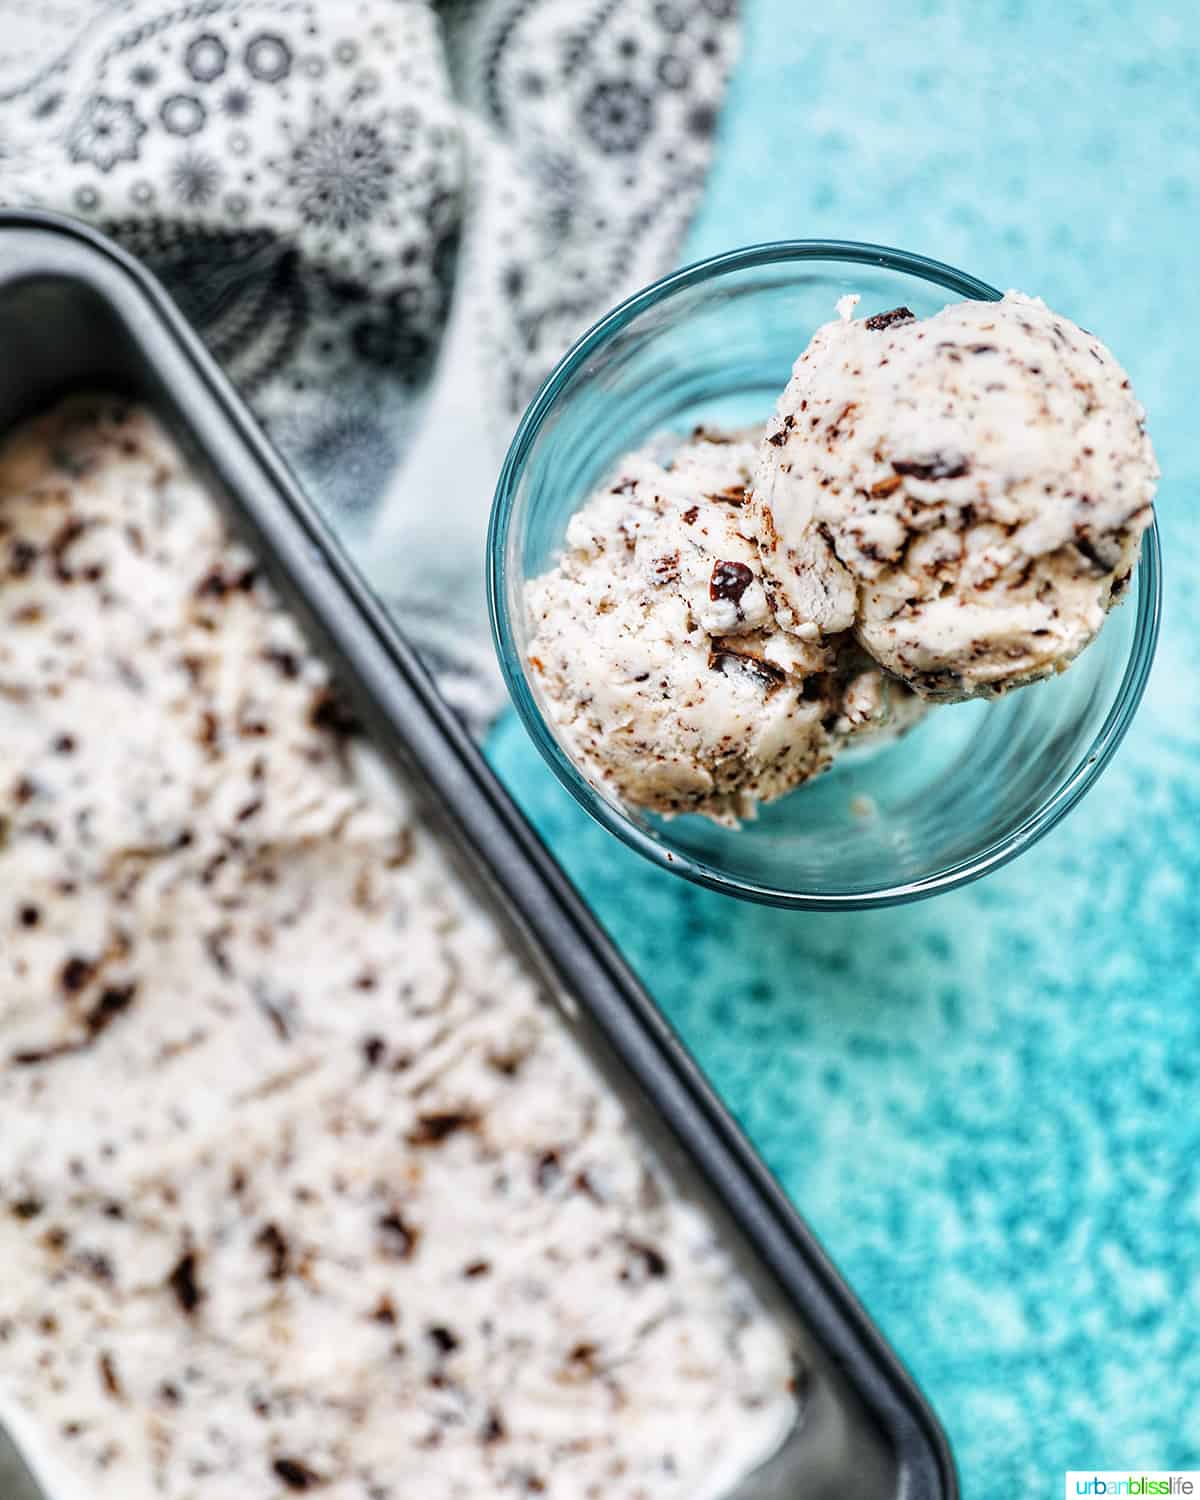 dairy-free chocolate chip ice cream in an ice cream scoop next to a pan of ice cream on a blue background.